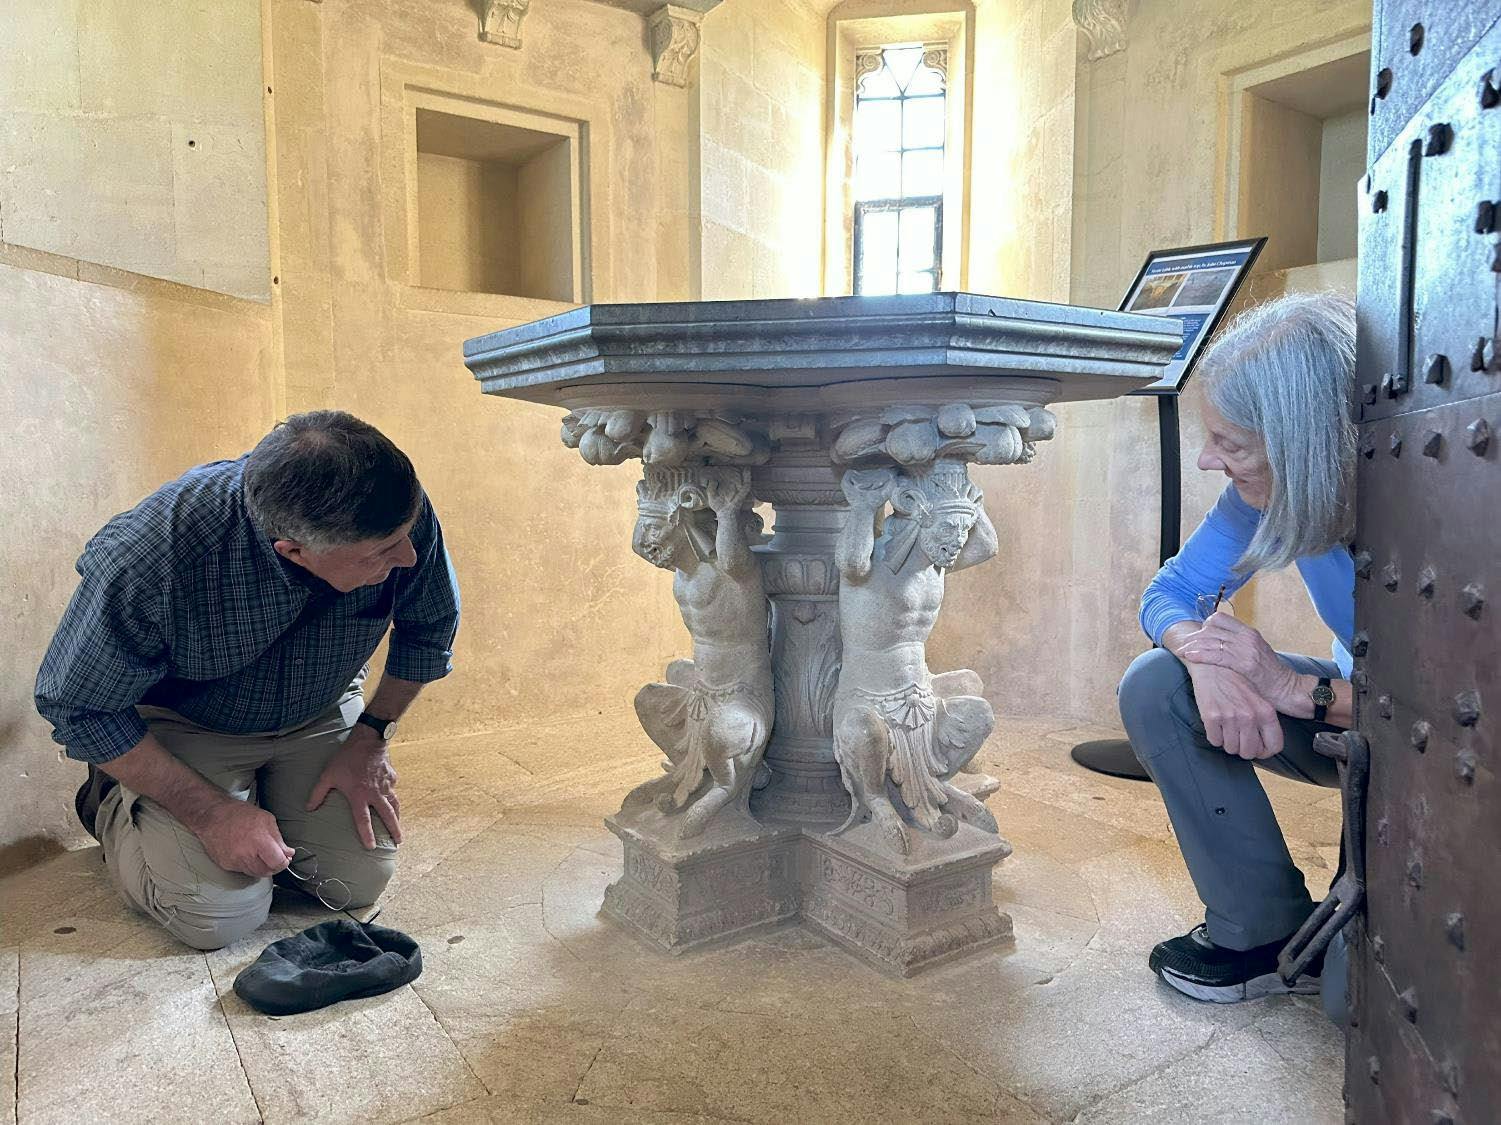 A couple examining an ornate National Trust treasure, a table, Lacock Abbey